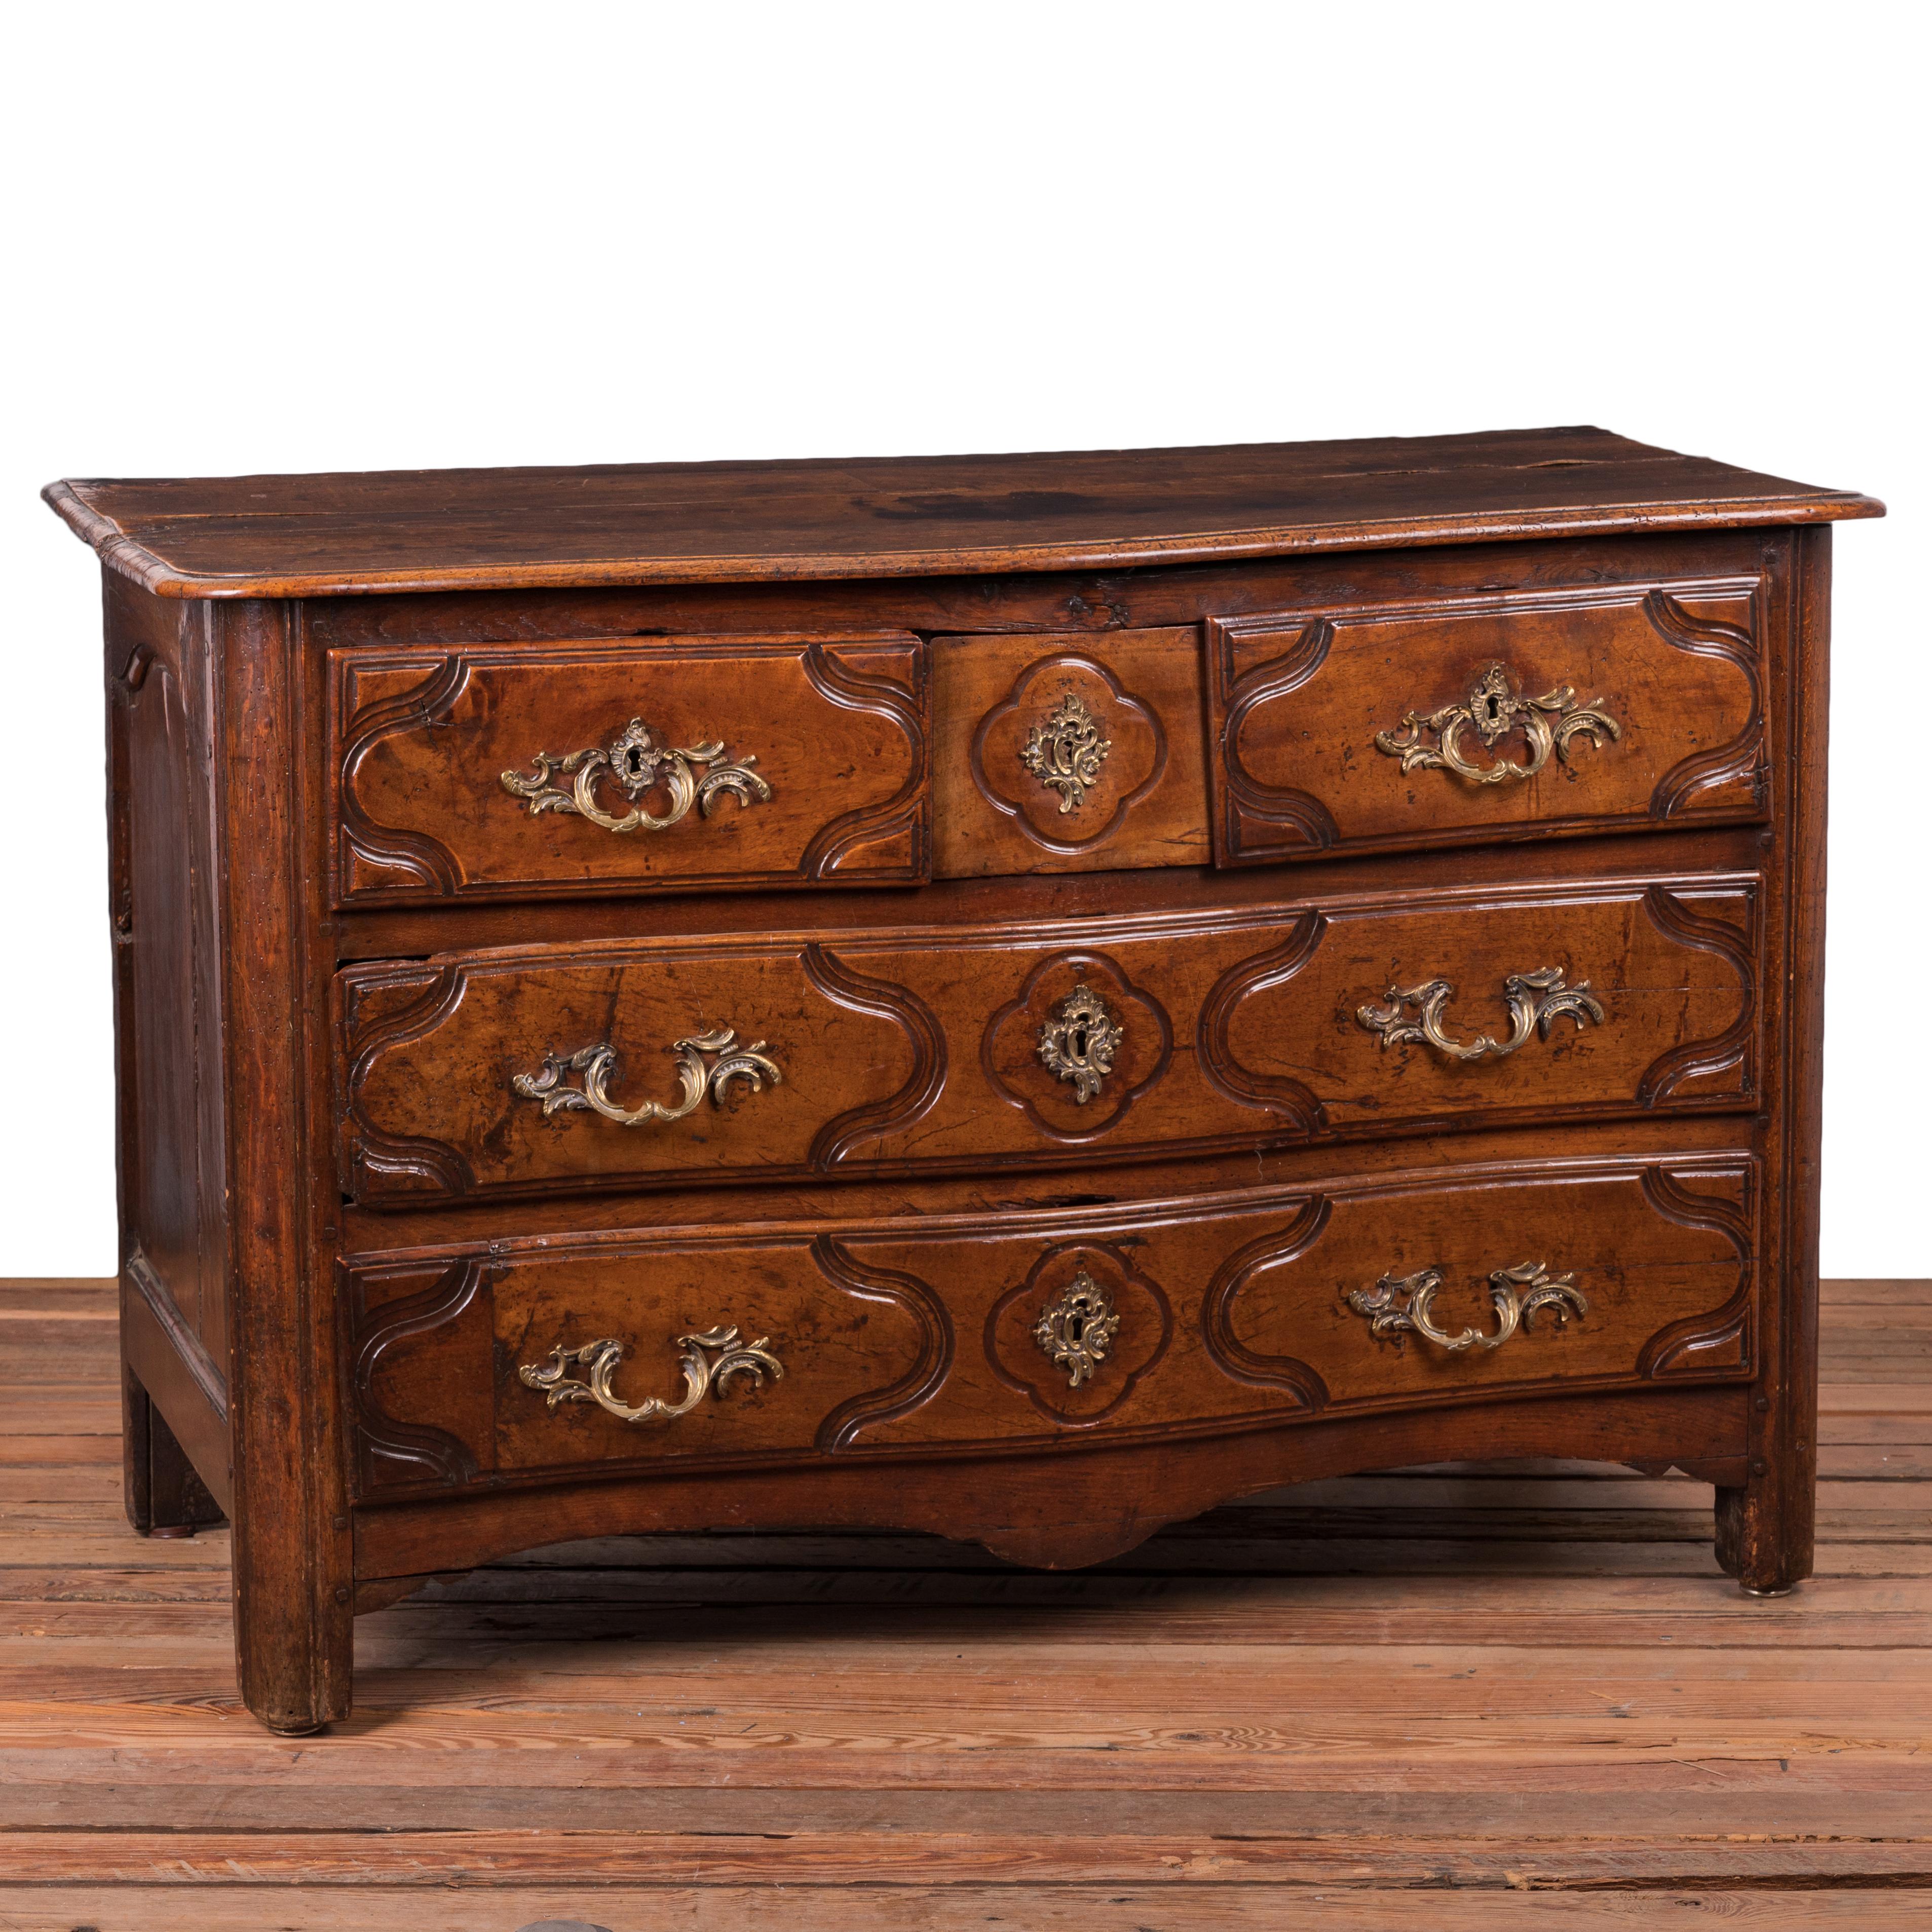 A Louis XV carved walnut commode, 18th Century.

Five drawers with three smaller drawers including a hidden drawer over two large drawers.

Provenance: Estate of T. Boone Pickens (J. Garrett Auctioneers, September 13, 2020)

49 ½ inches wide by 23